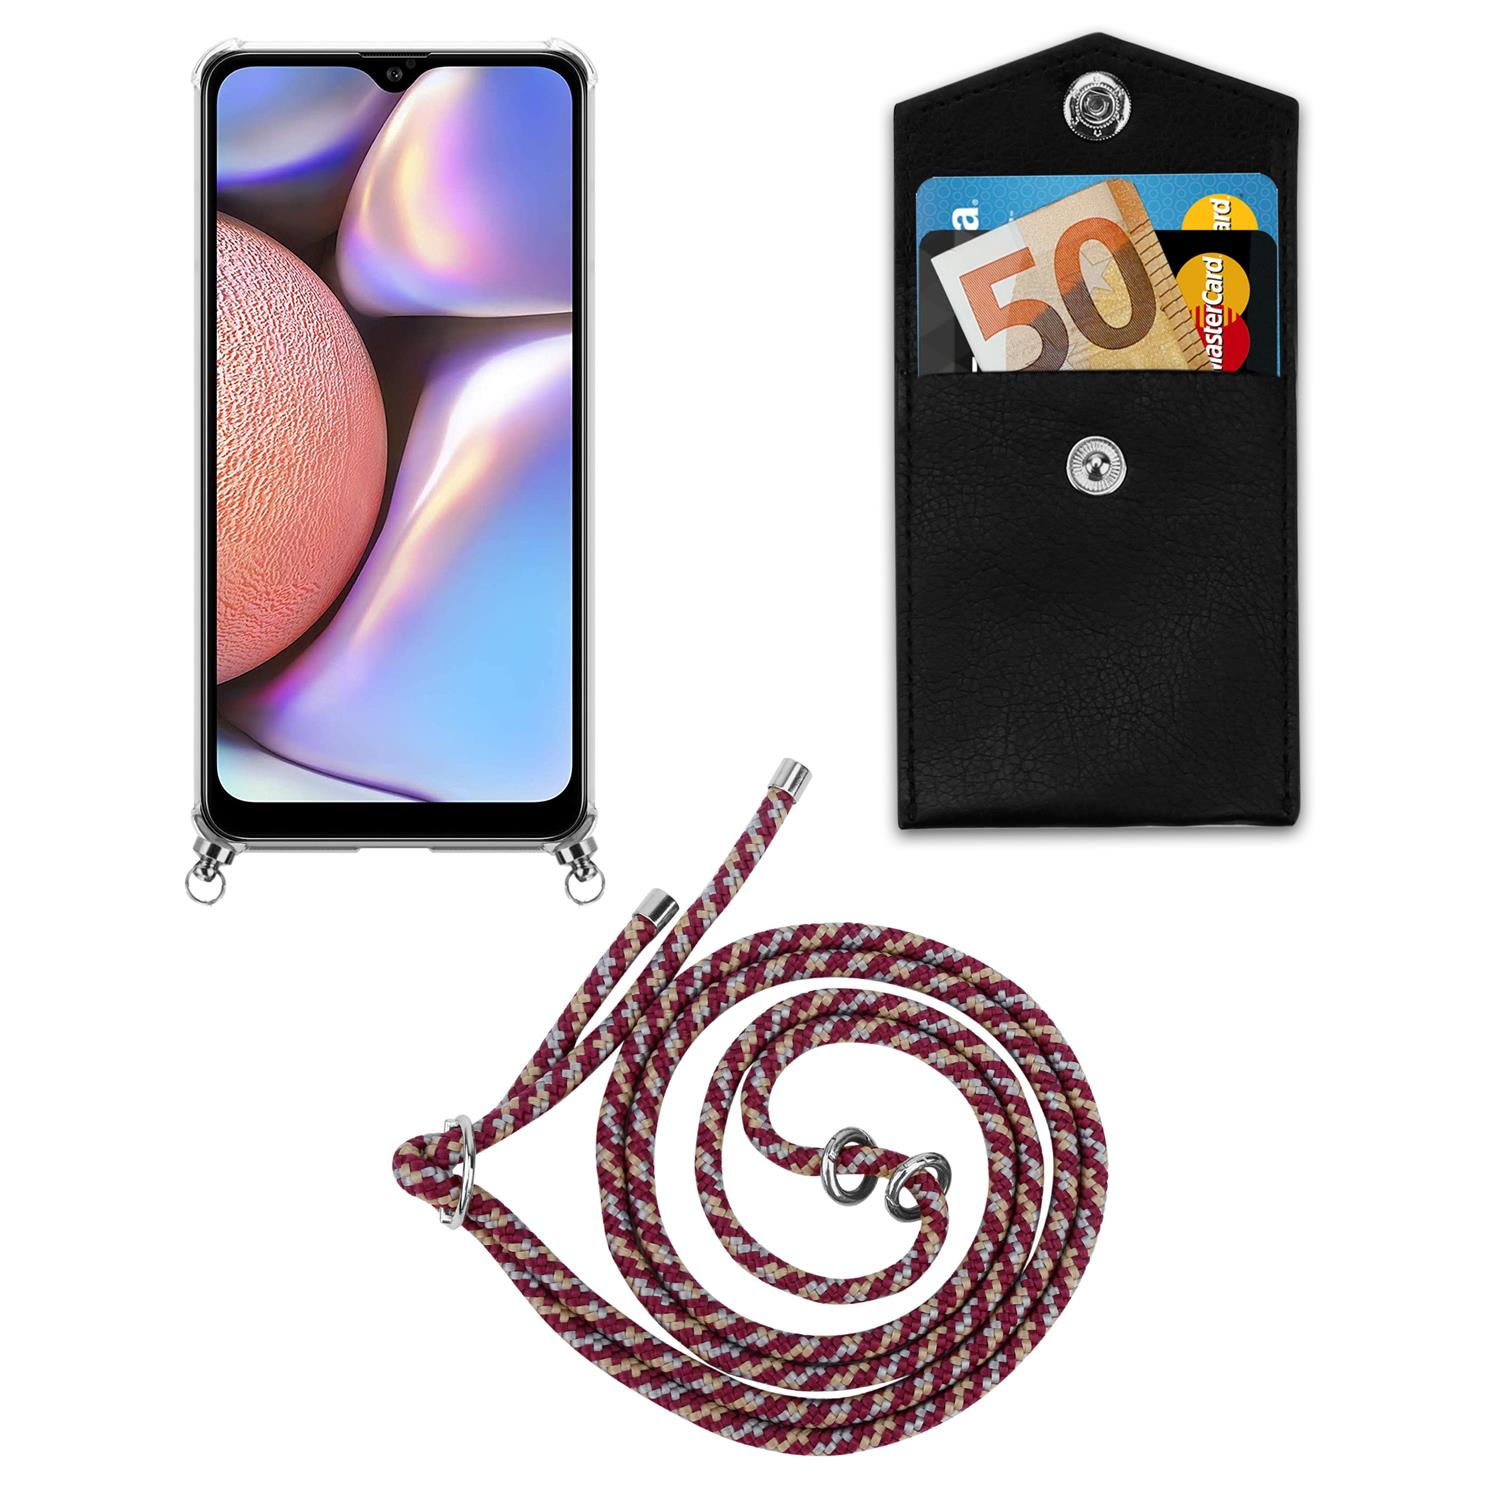 Band / abnehmbarer GELB Kordel Hülle, Kette und Galaxy A10s WEIß mit Ringen, Silber Samsung, ROT Handy M01s, Backcover, CADORABO